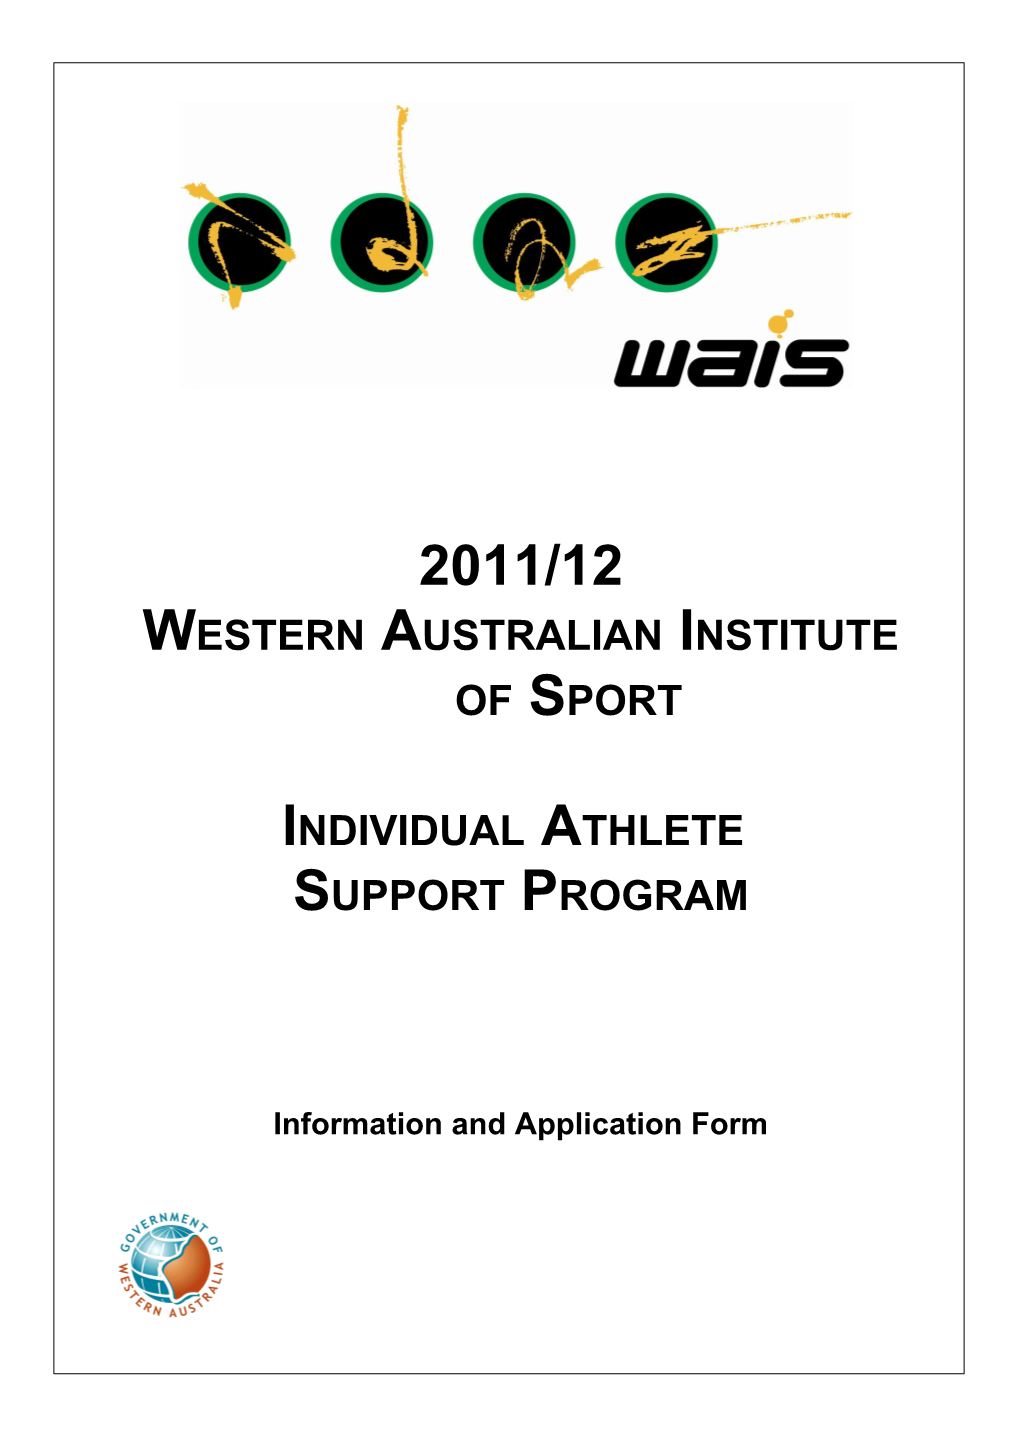 Individual Athlete Support Program Application Form 2011-2012